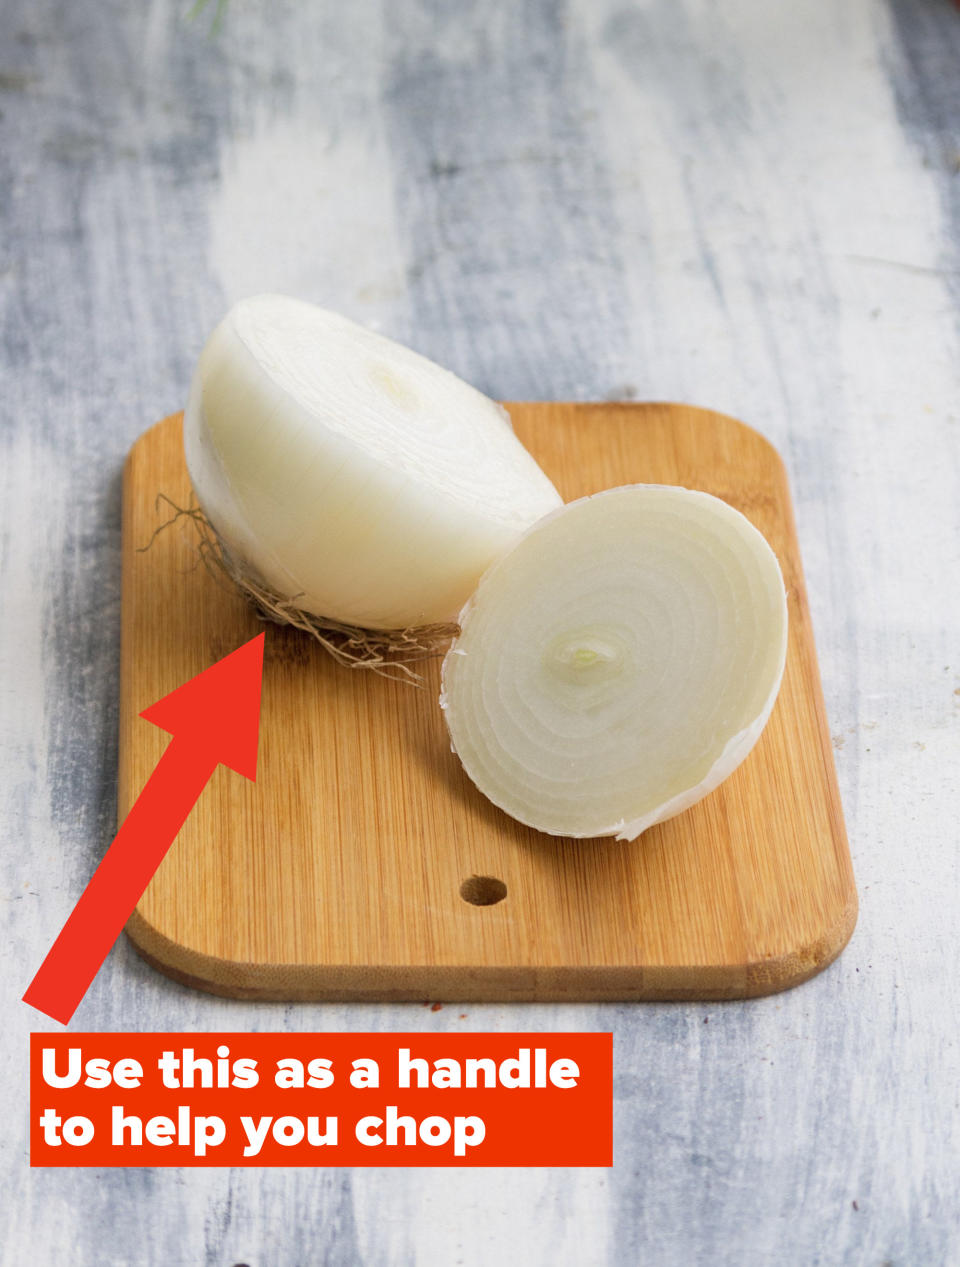 A halved white onion on a wooden table.